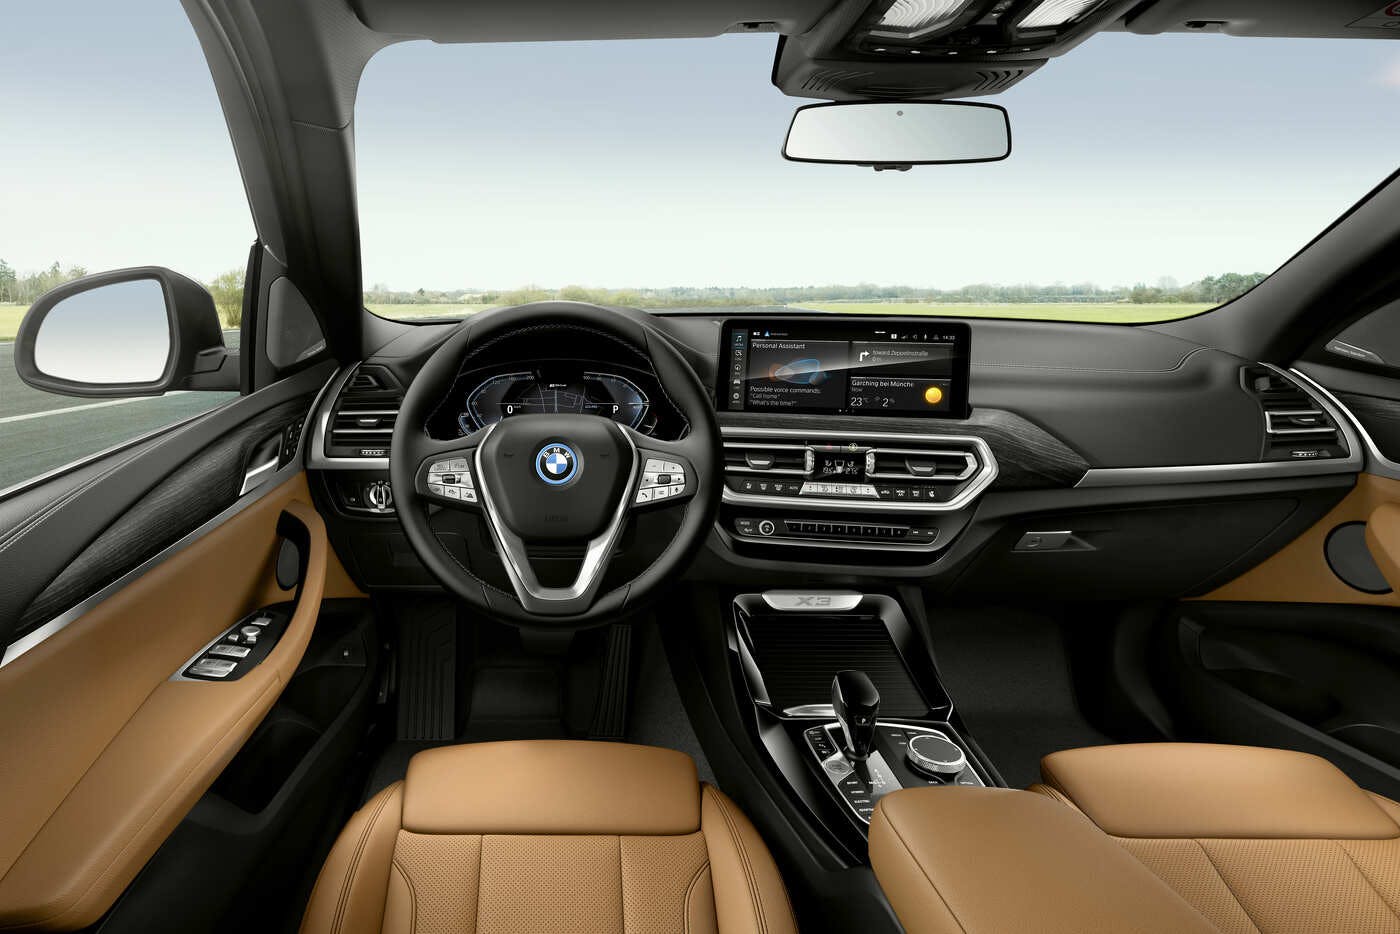 2009 BMW X3 Price, Value, Ratings & Reviews